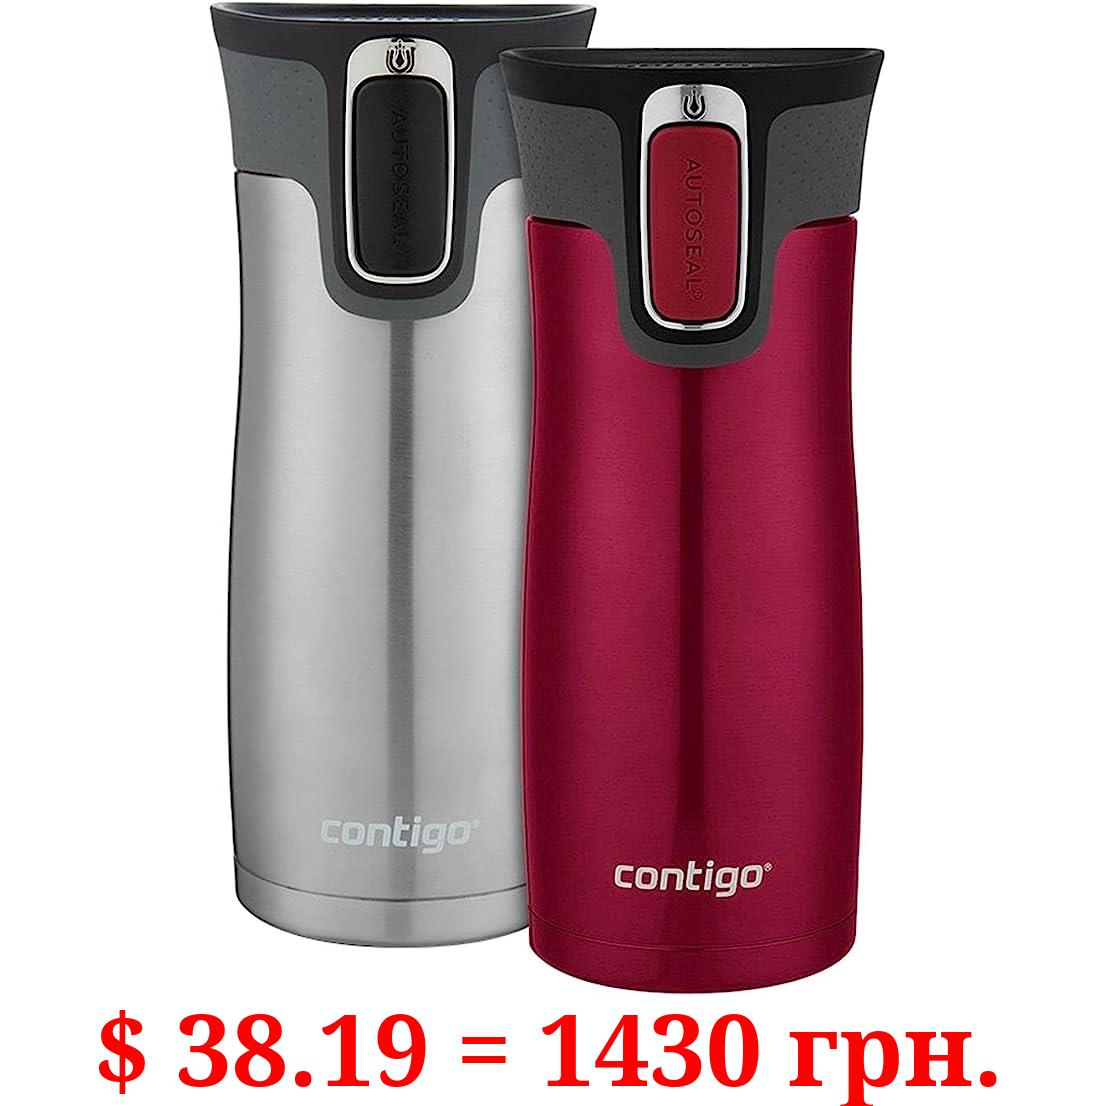 Contigo West Loop Stainless Steel Vacuum-Insulated Travel Mug with Spill-Proof Lid, Keeps Drinks Hot up to 5 Hours and Cold up to 12 Hours, 16oz 2-Pack, Very Berry & Steel